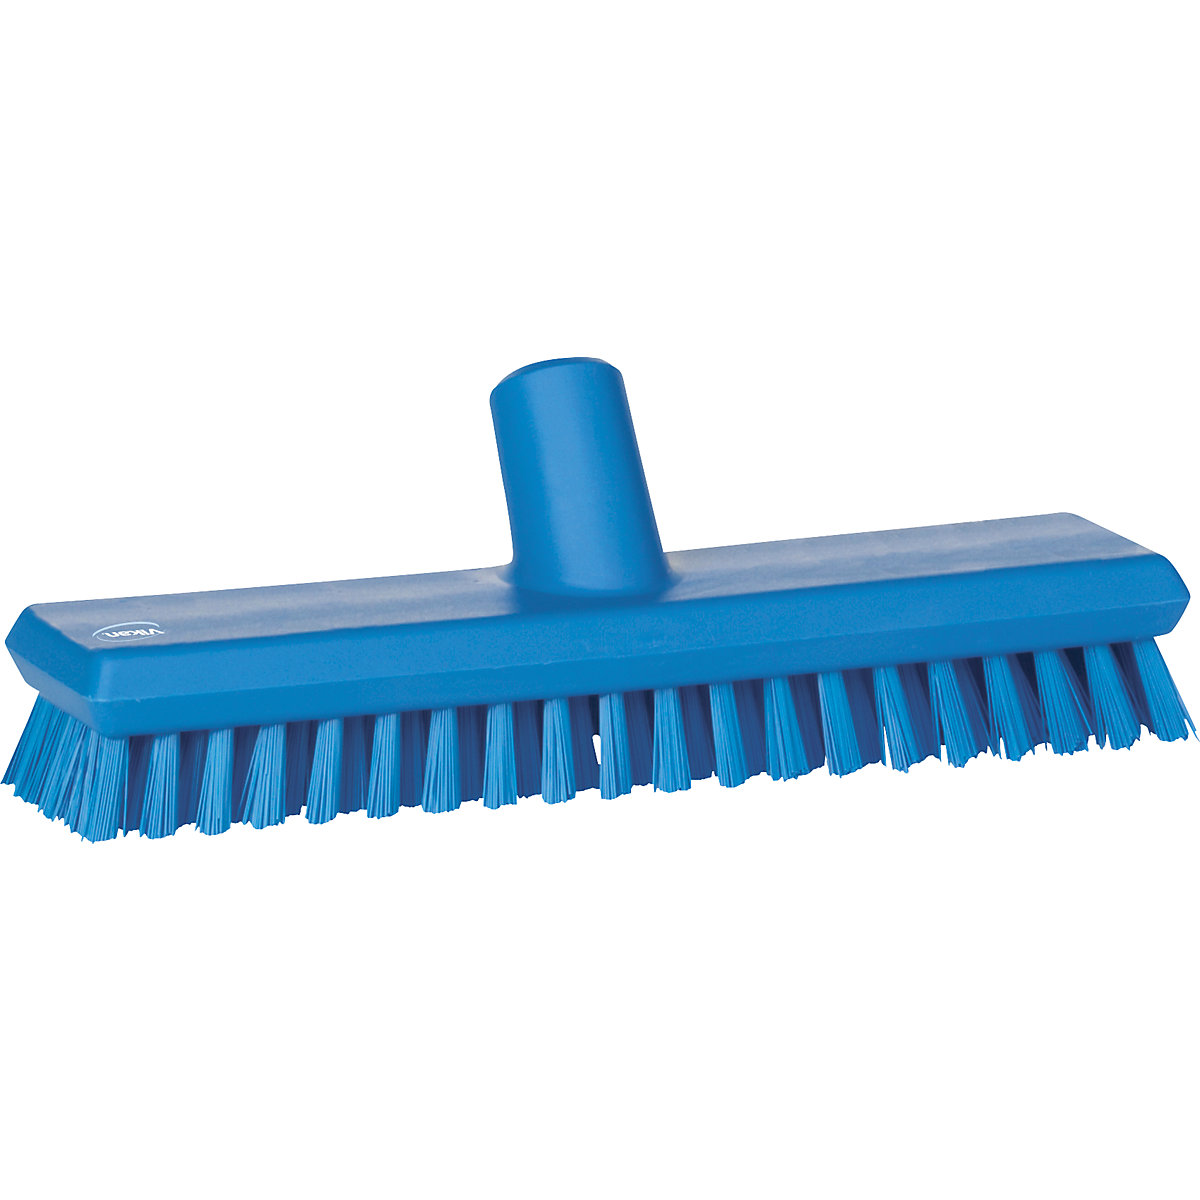 Scrubber with water channel – Vikan